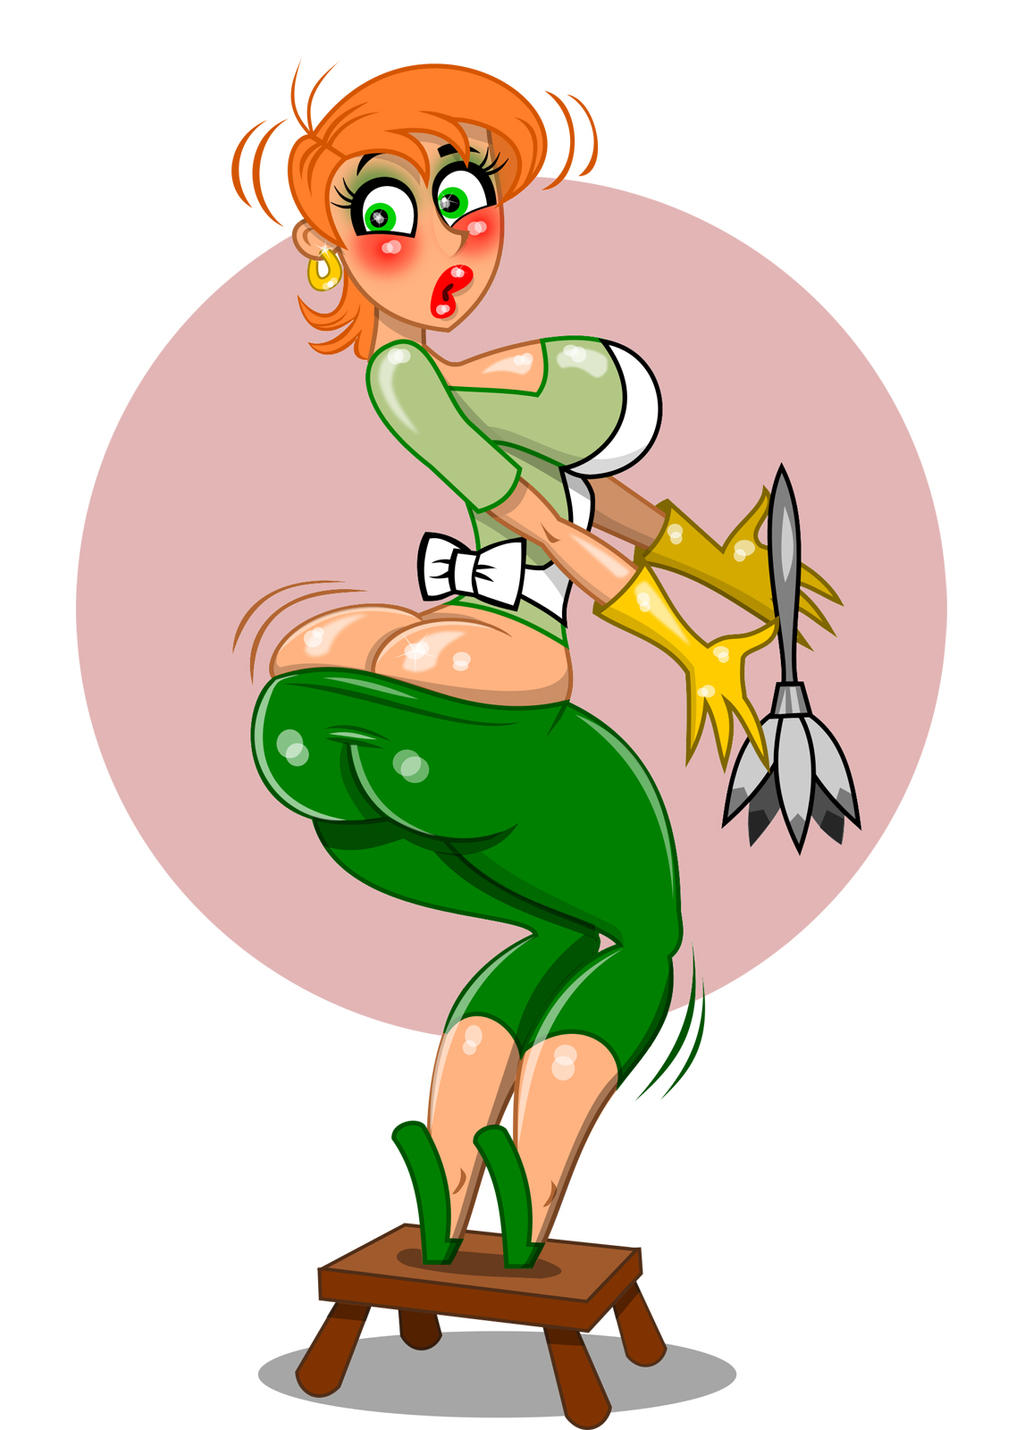 Dexters Mom Altered By Larry Malone On DeviantArt.